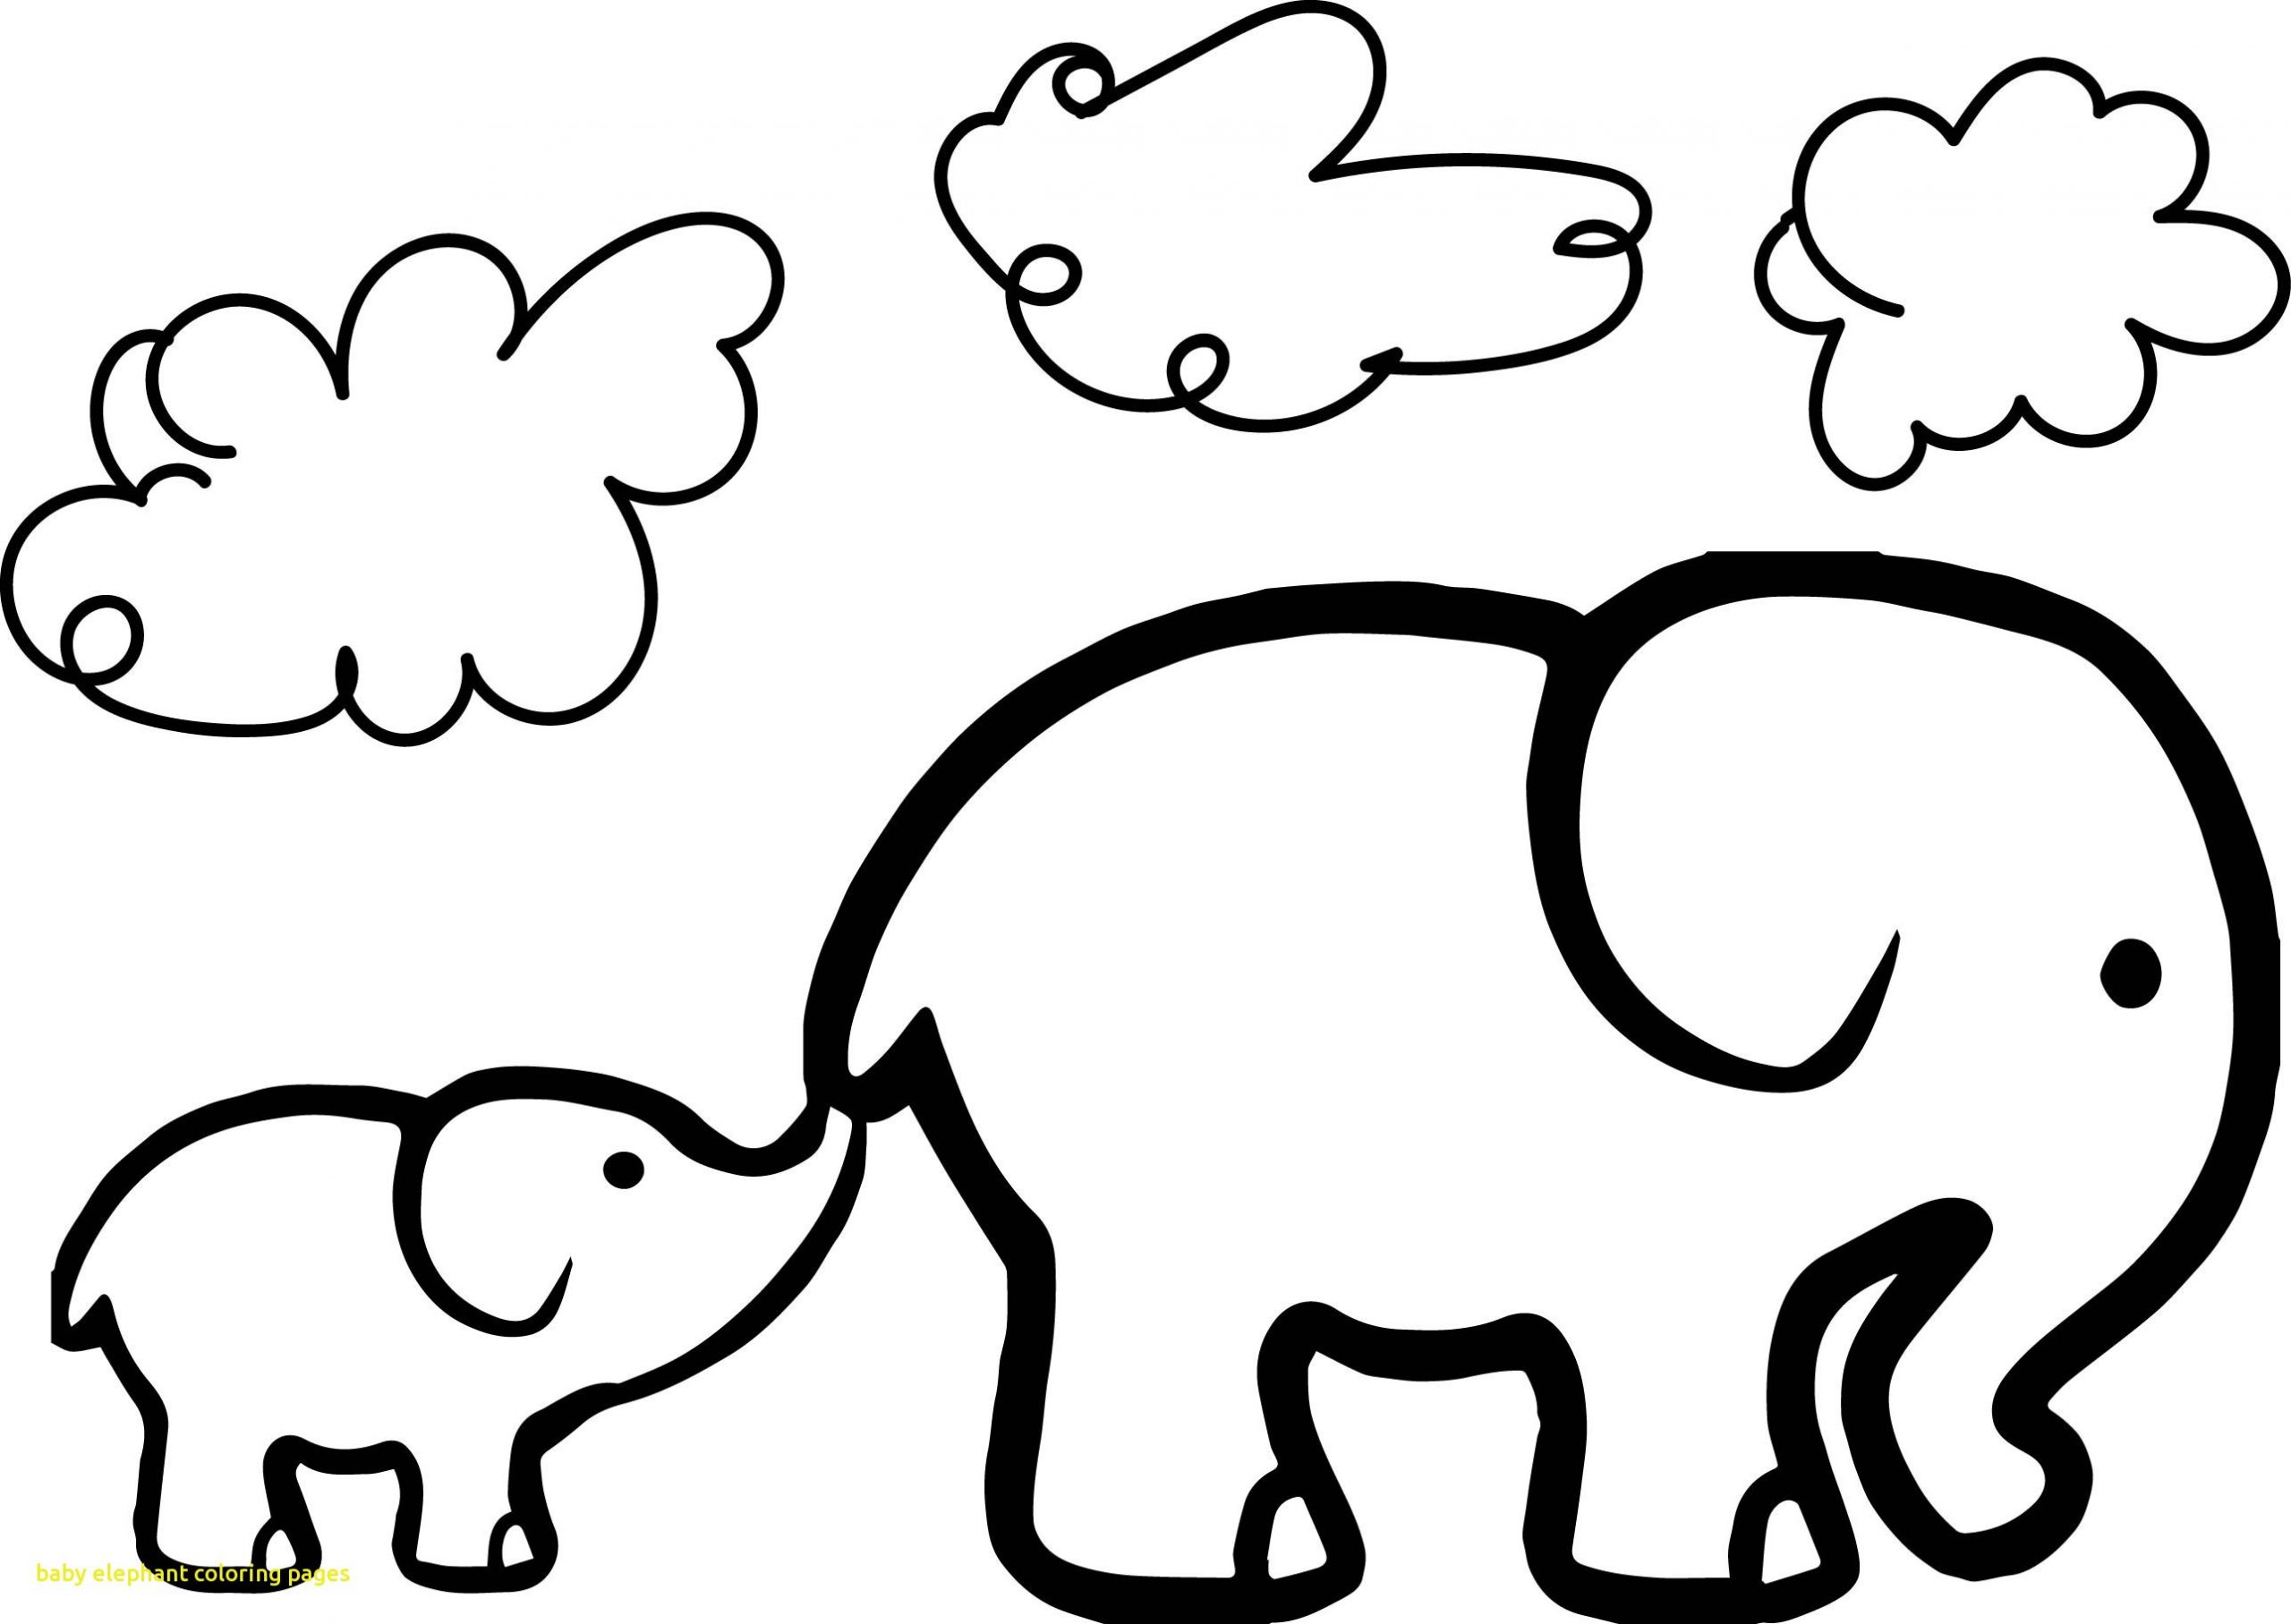 Cute Baby Elephant Coloring Pages
 Cute Baby Elephant Drawing at GetDrawings